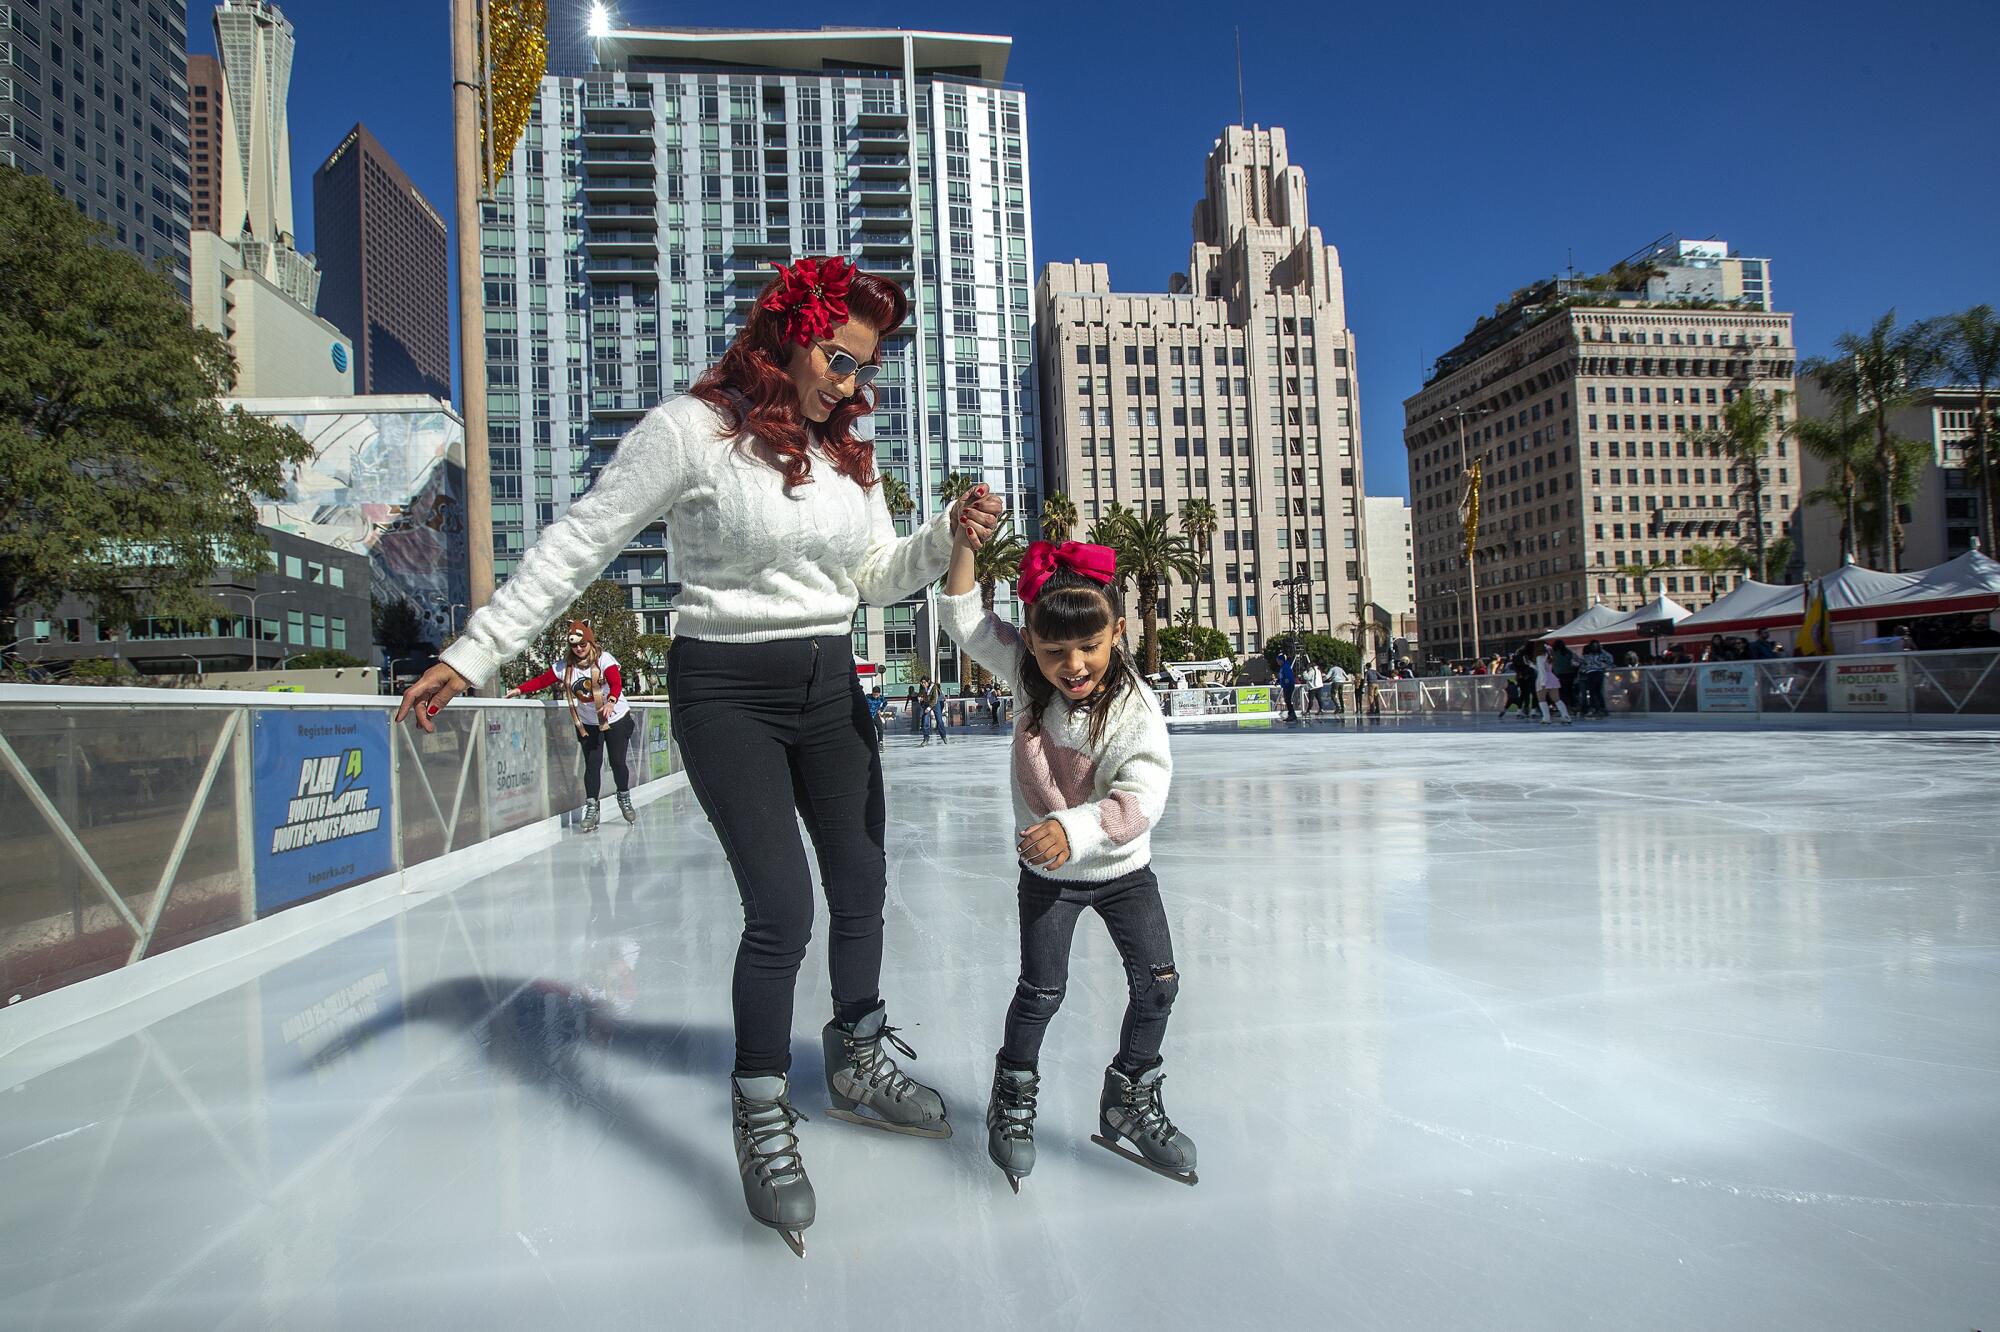 A woman and her young daughter enjoy ice skating together 